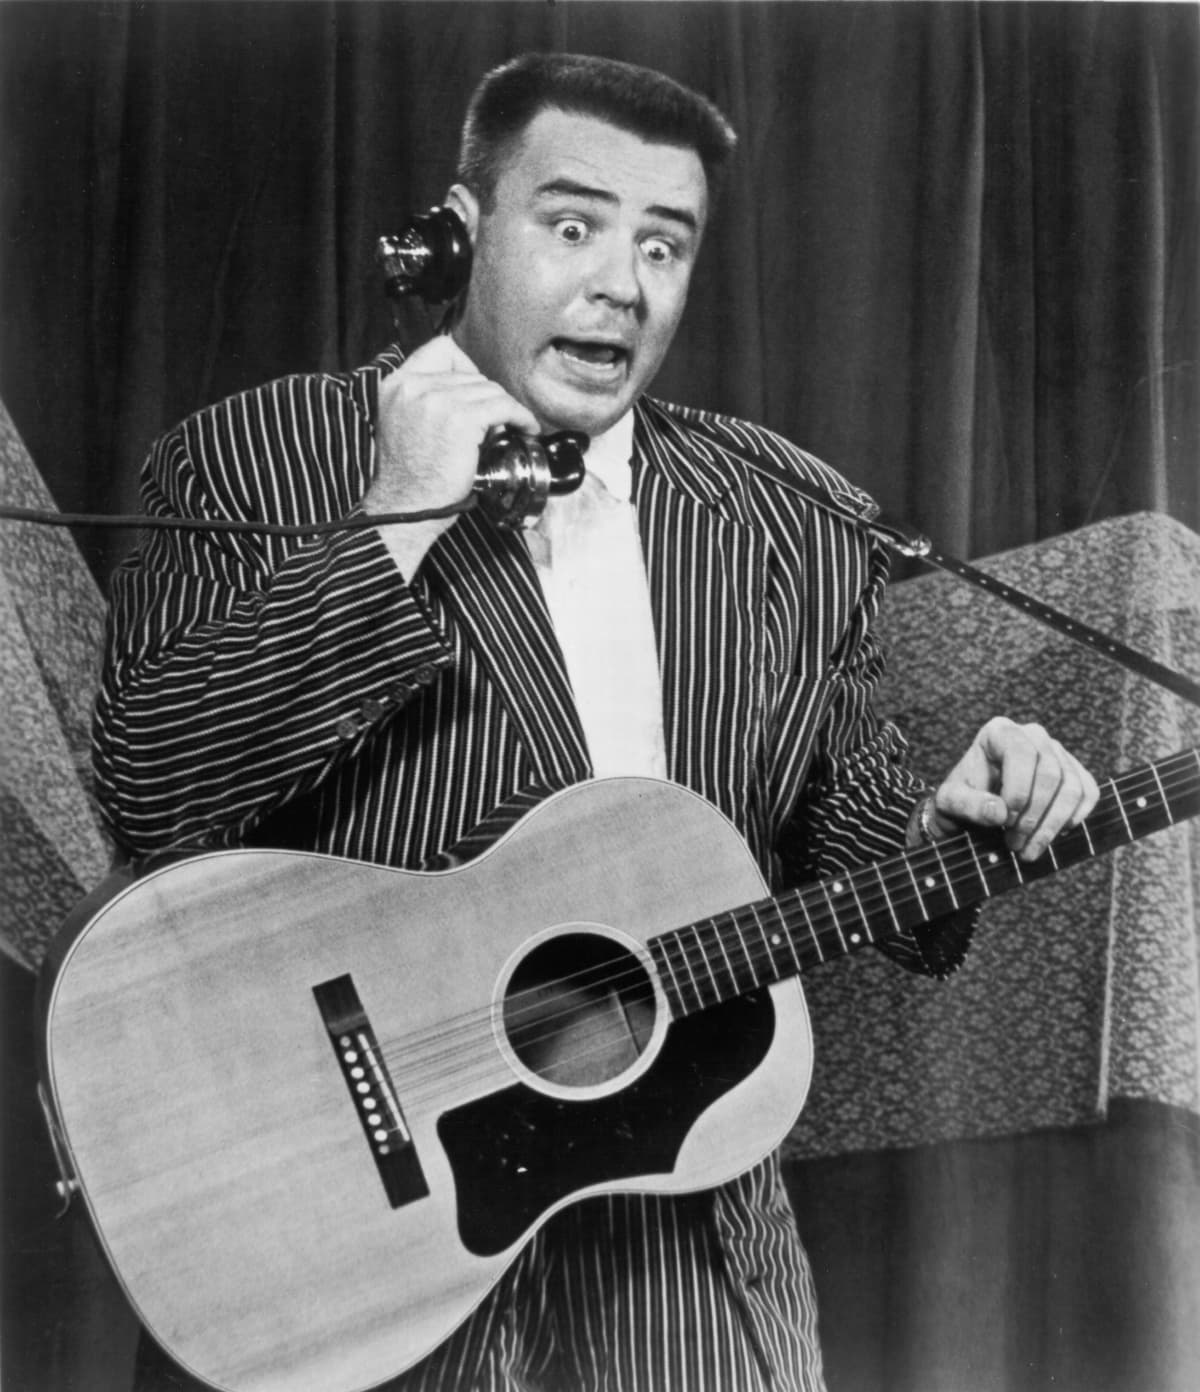 1958:  The Big Bopper (Jiles Perry Richardson, Jr.) performs his hit "Chantilly Lace" on stage in 1958. (Photo by Michael Ochs Archives/Getty Images)